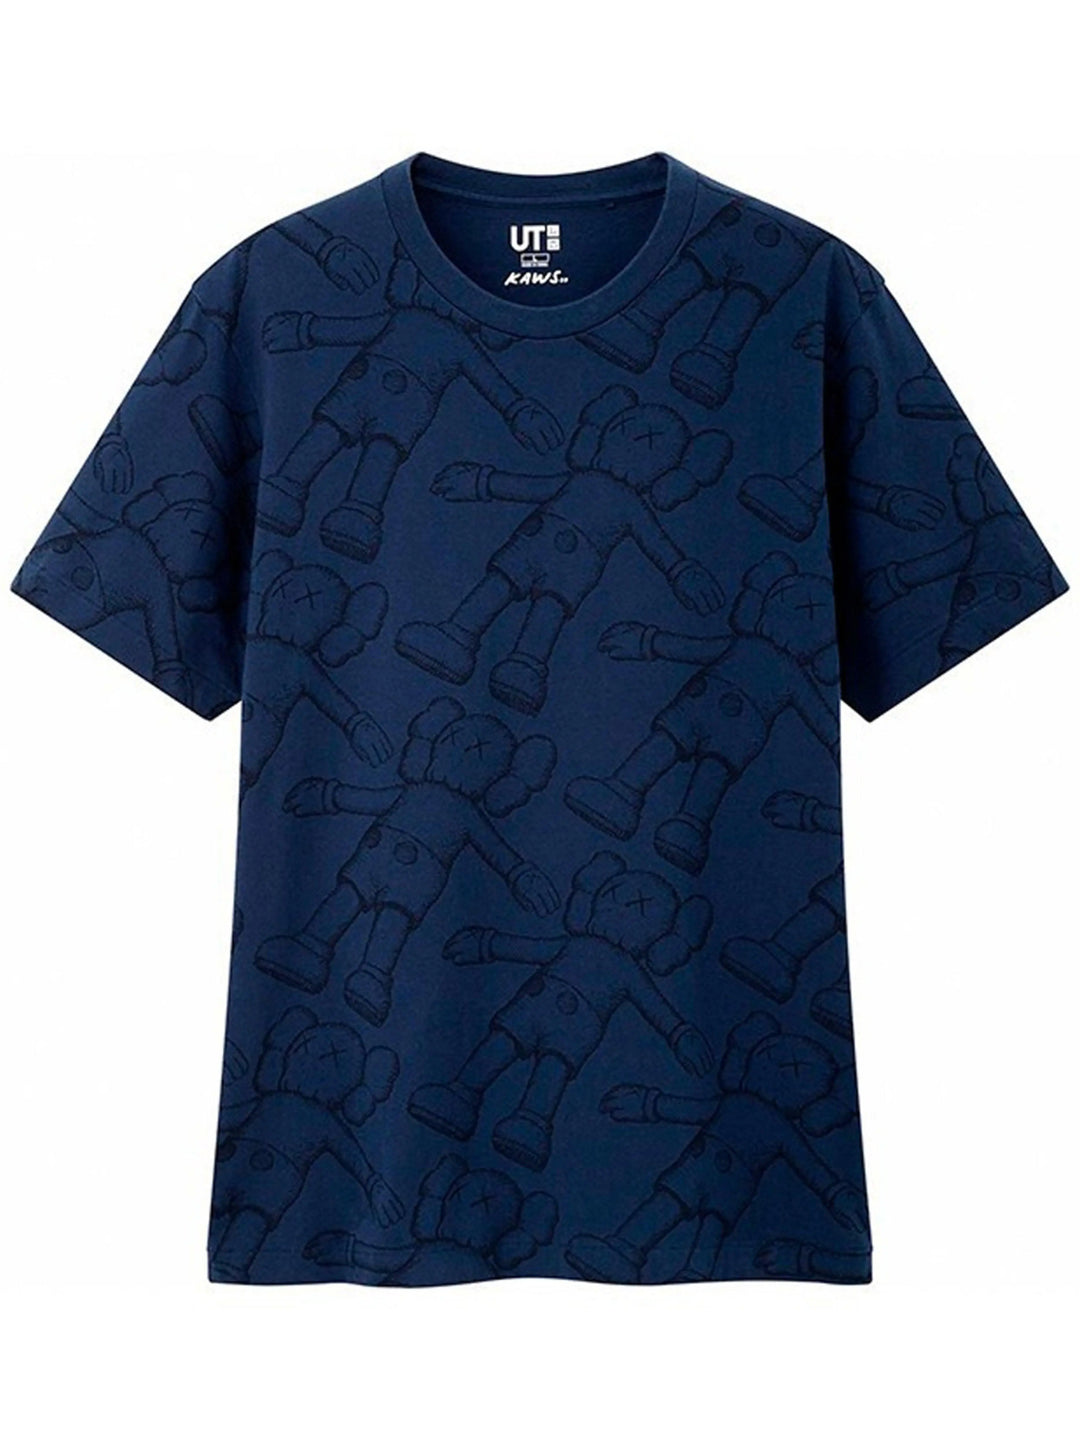 KAWS x Uniqlo All Over Holiday Print Tee (US Sizing) Blue Prior